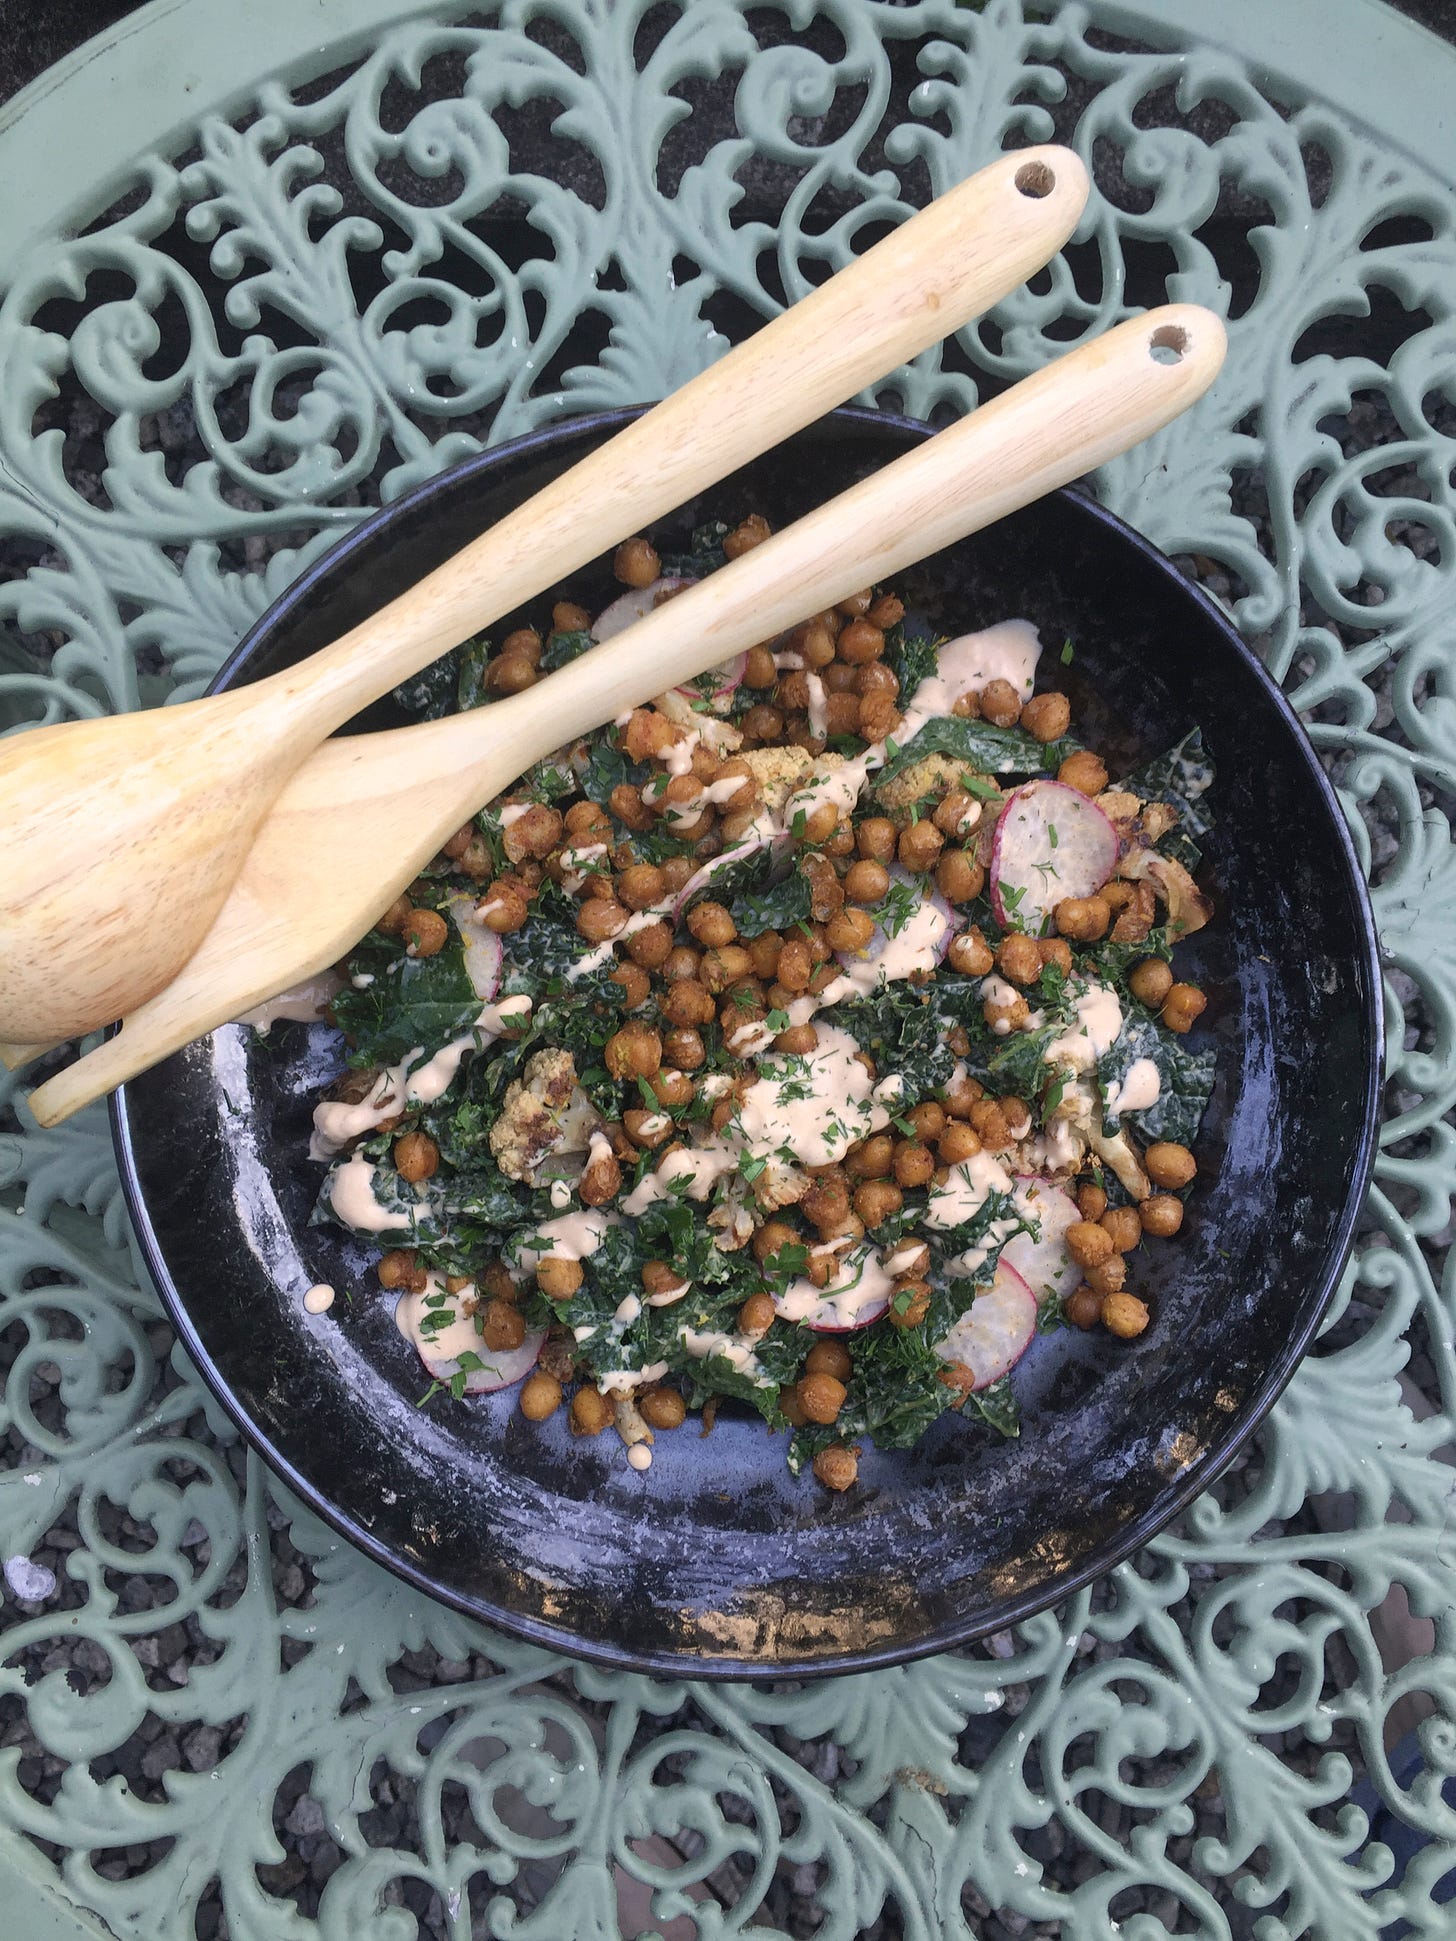 on a wrought-iron outdoor table, a shallow black dish of kale and roasted cauliflower with chickpeas and herbs and a drizzle of tahini dressing overtop. Wooden salad utensils rest across the top edge of the dish.